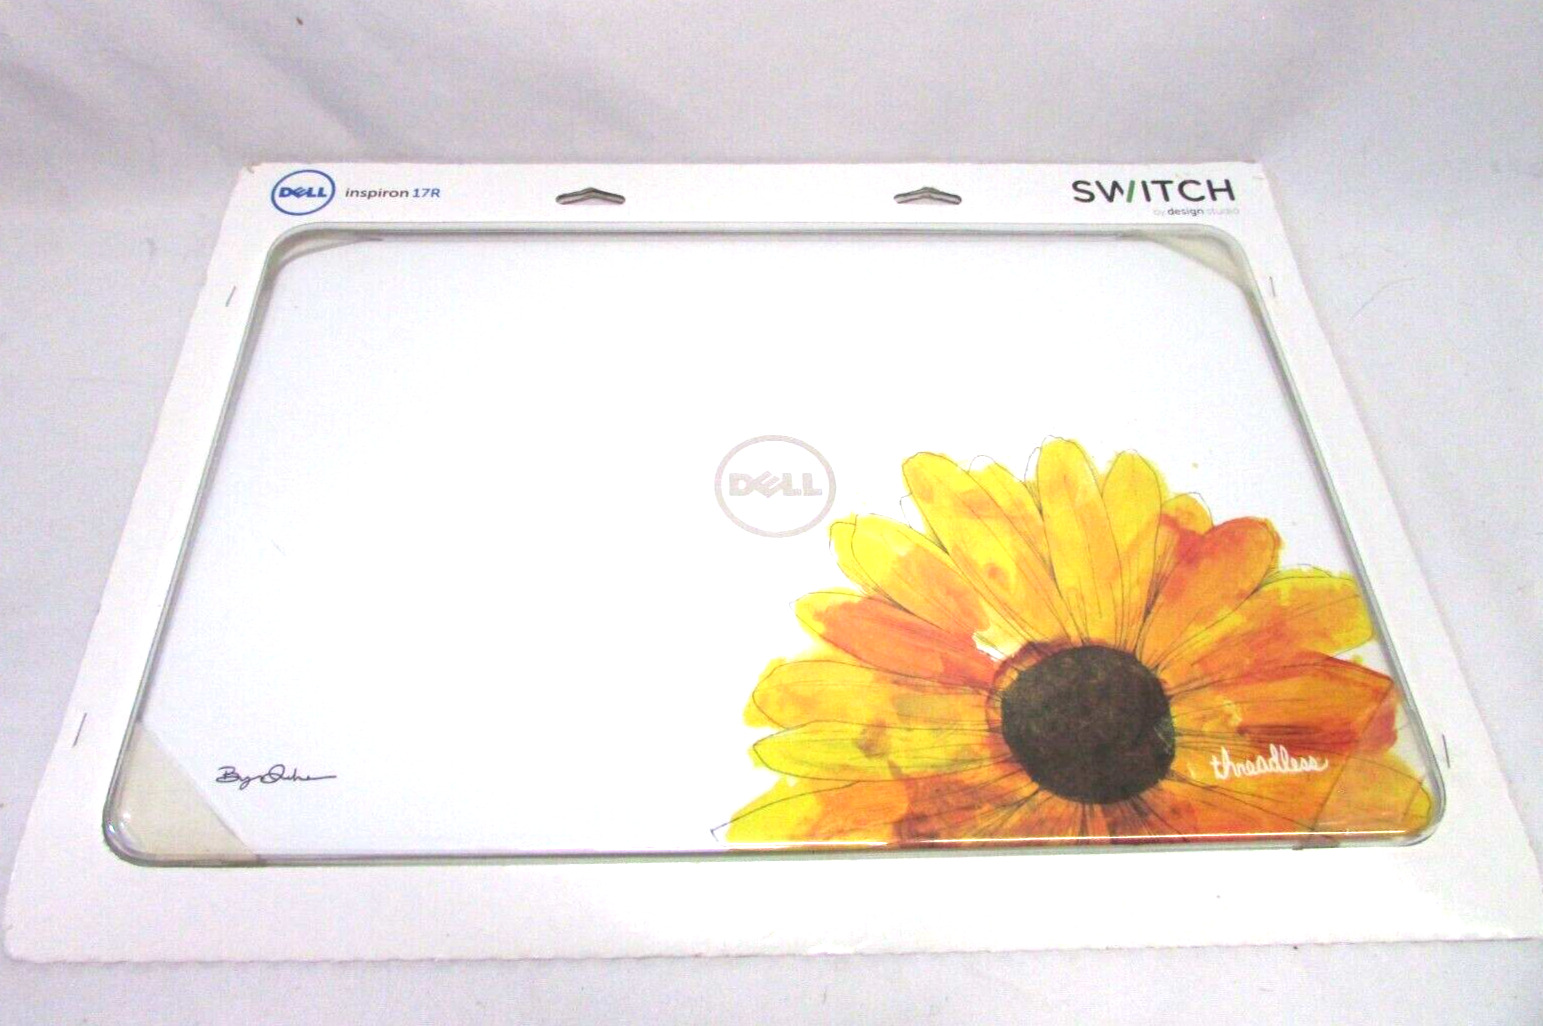 NEW SWITCH LID COVER FOR DELL INSPIRON 17R NOTEBOOK SUNFLOWER by Design Studio